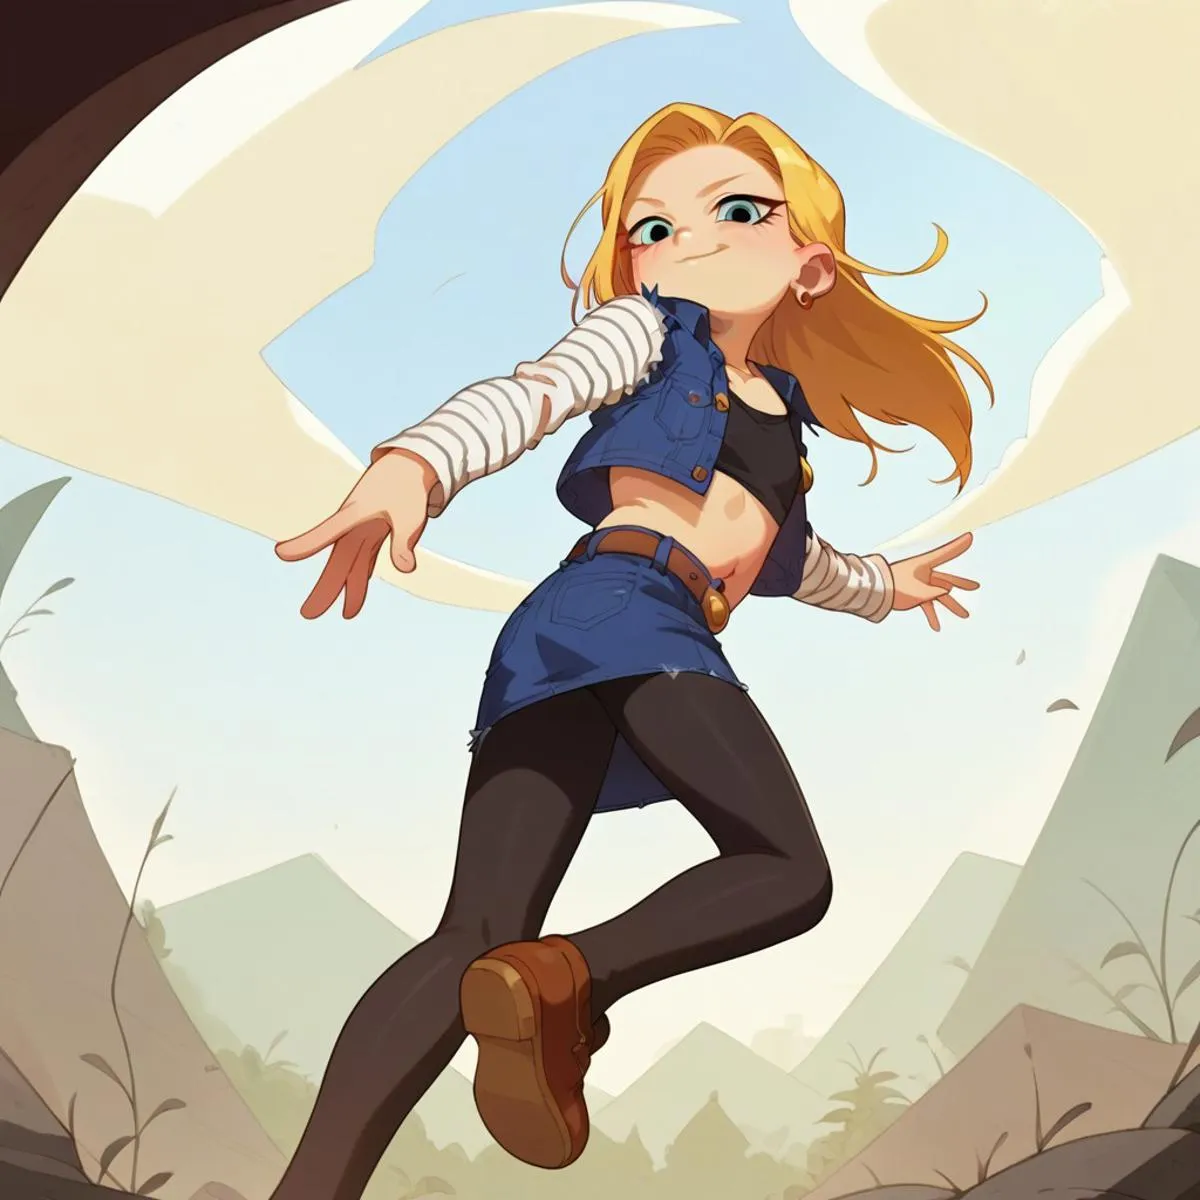 An anime girl with blonde hair, in a dynamic pose, against a beautiful outdoor scenery, generated by AI using Stable Diffusion.